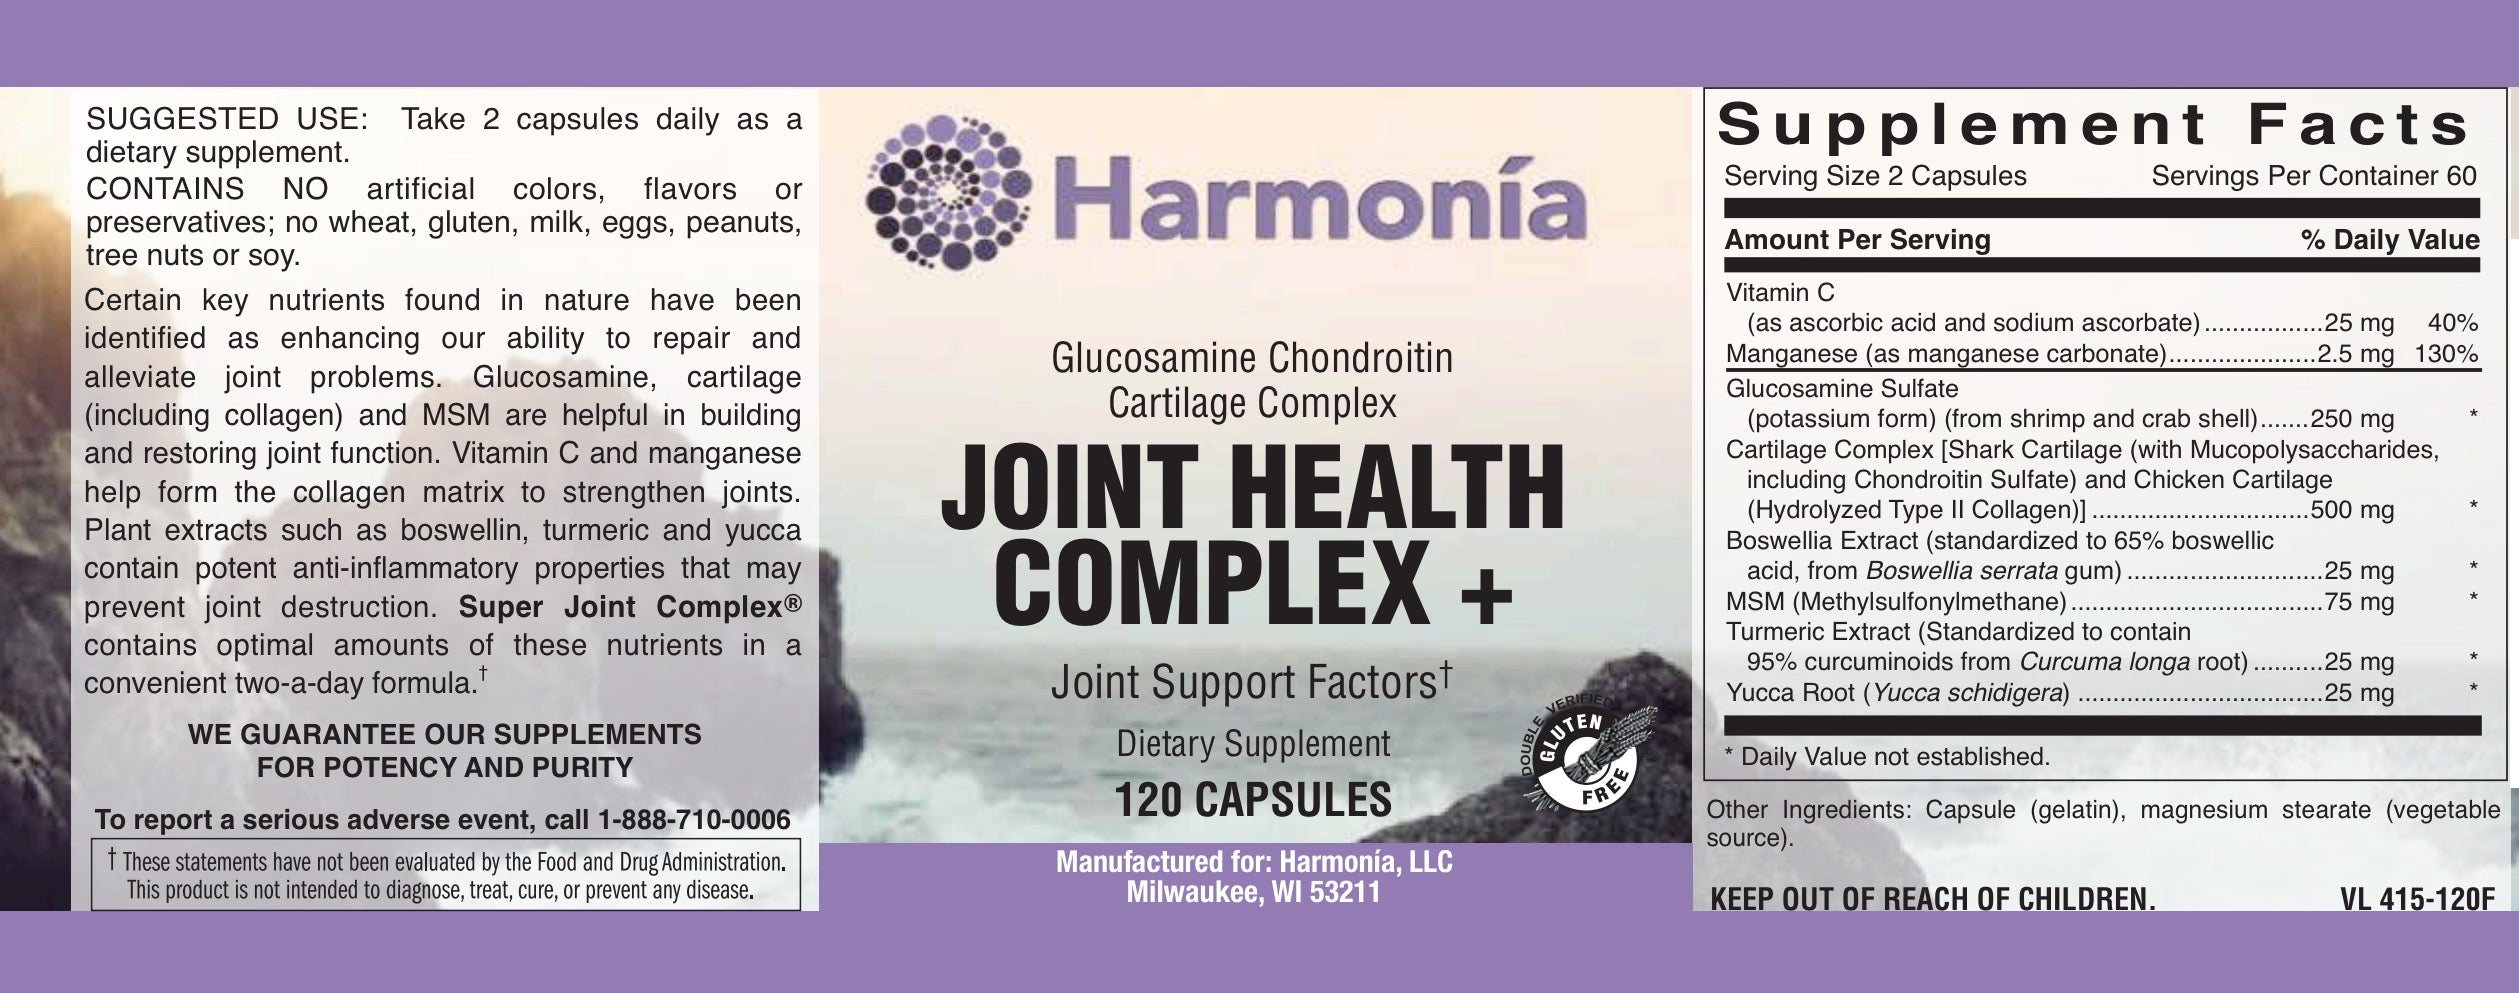 Joint Health Complex +